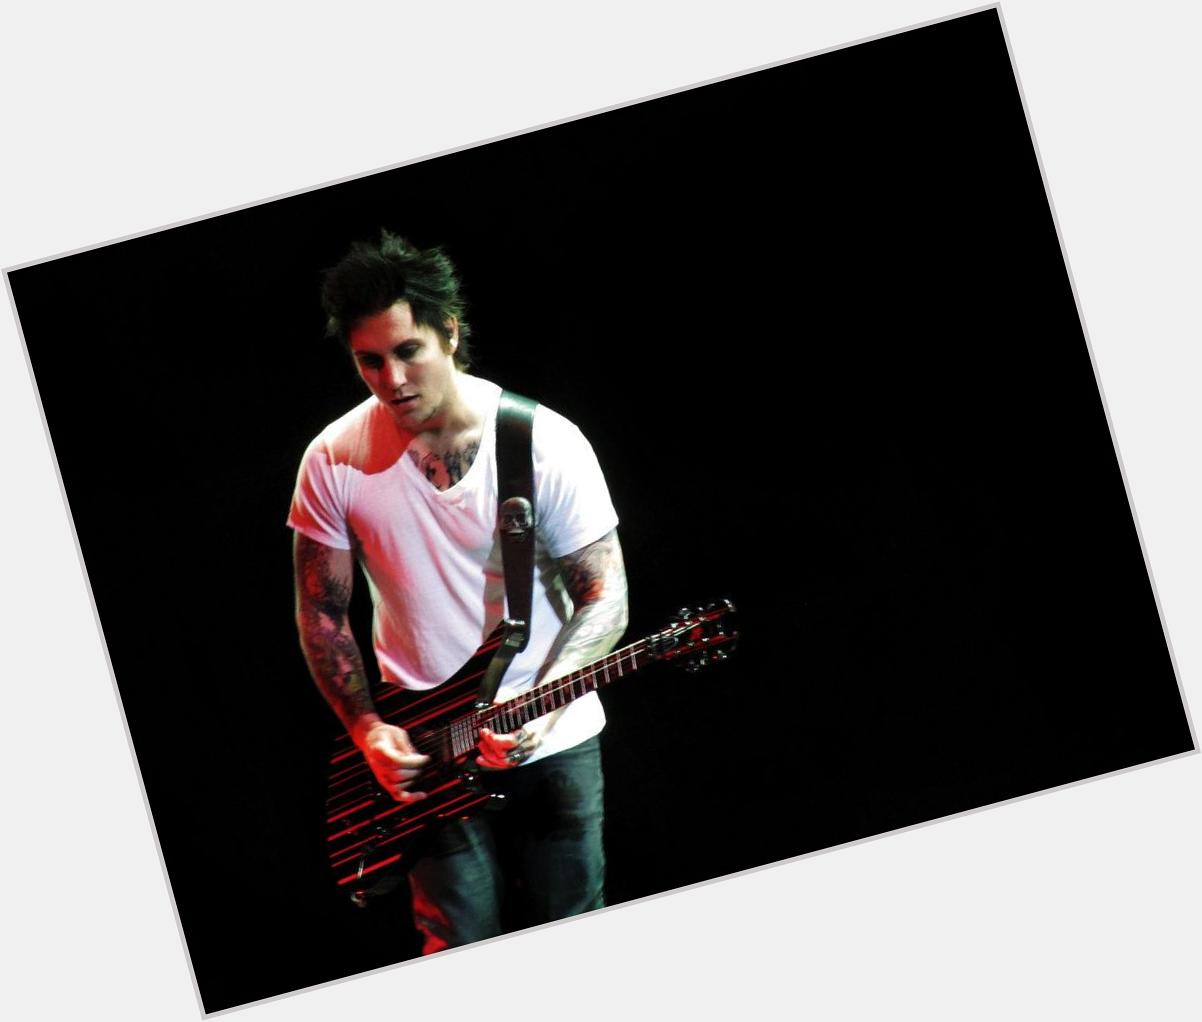  happy birthday Synyster Gates , you are my favorite guitar player. Stay cool and rock !! \\m/ 